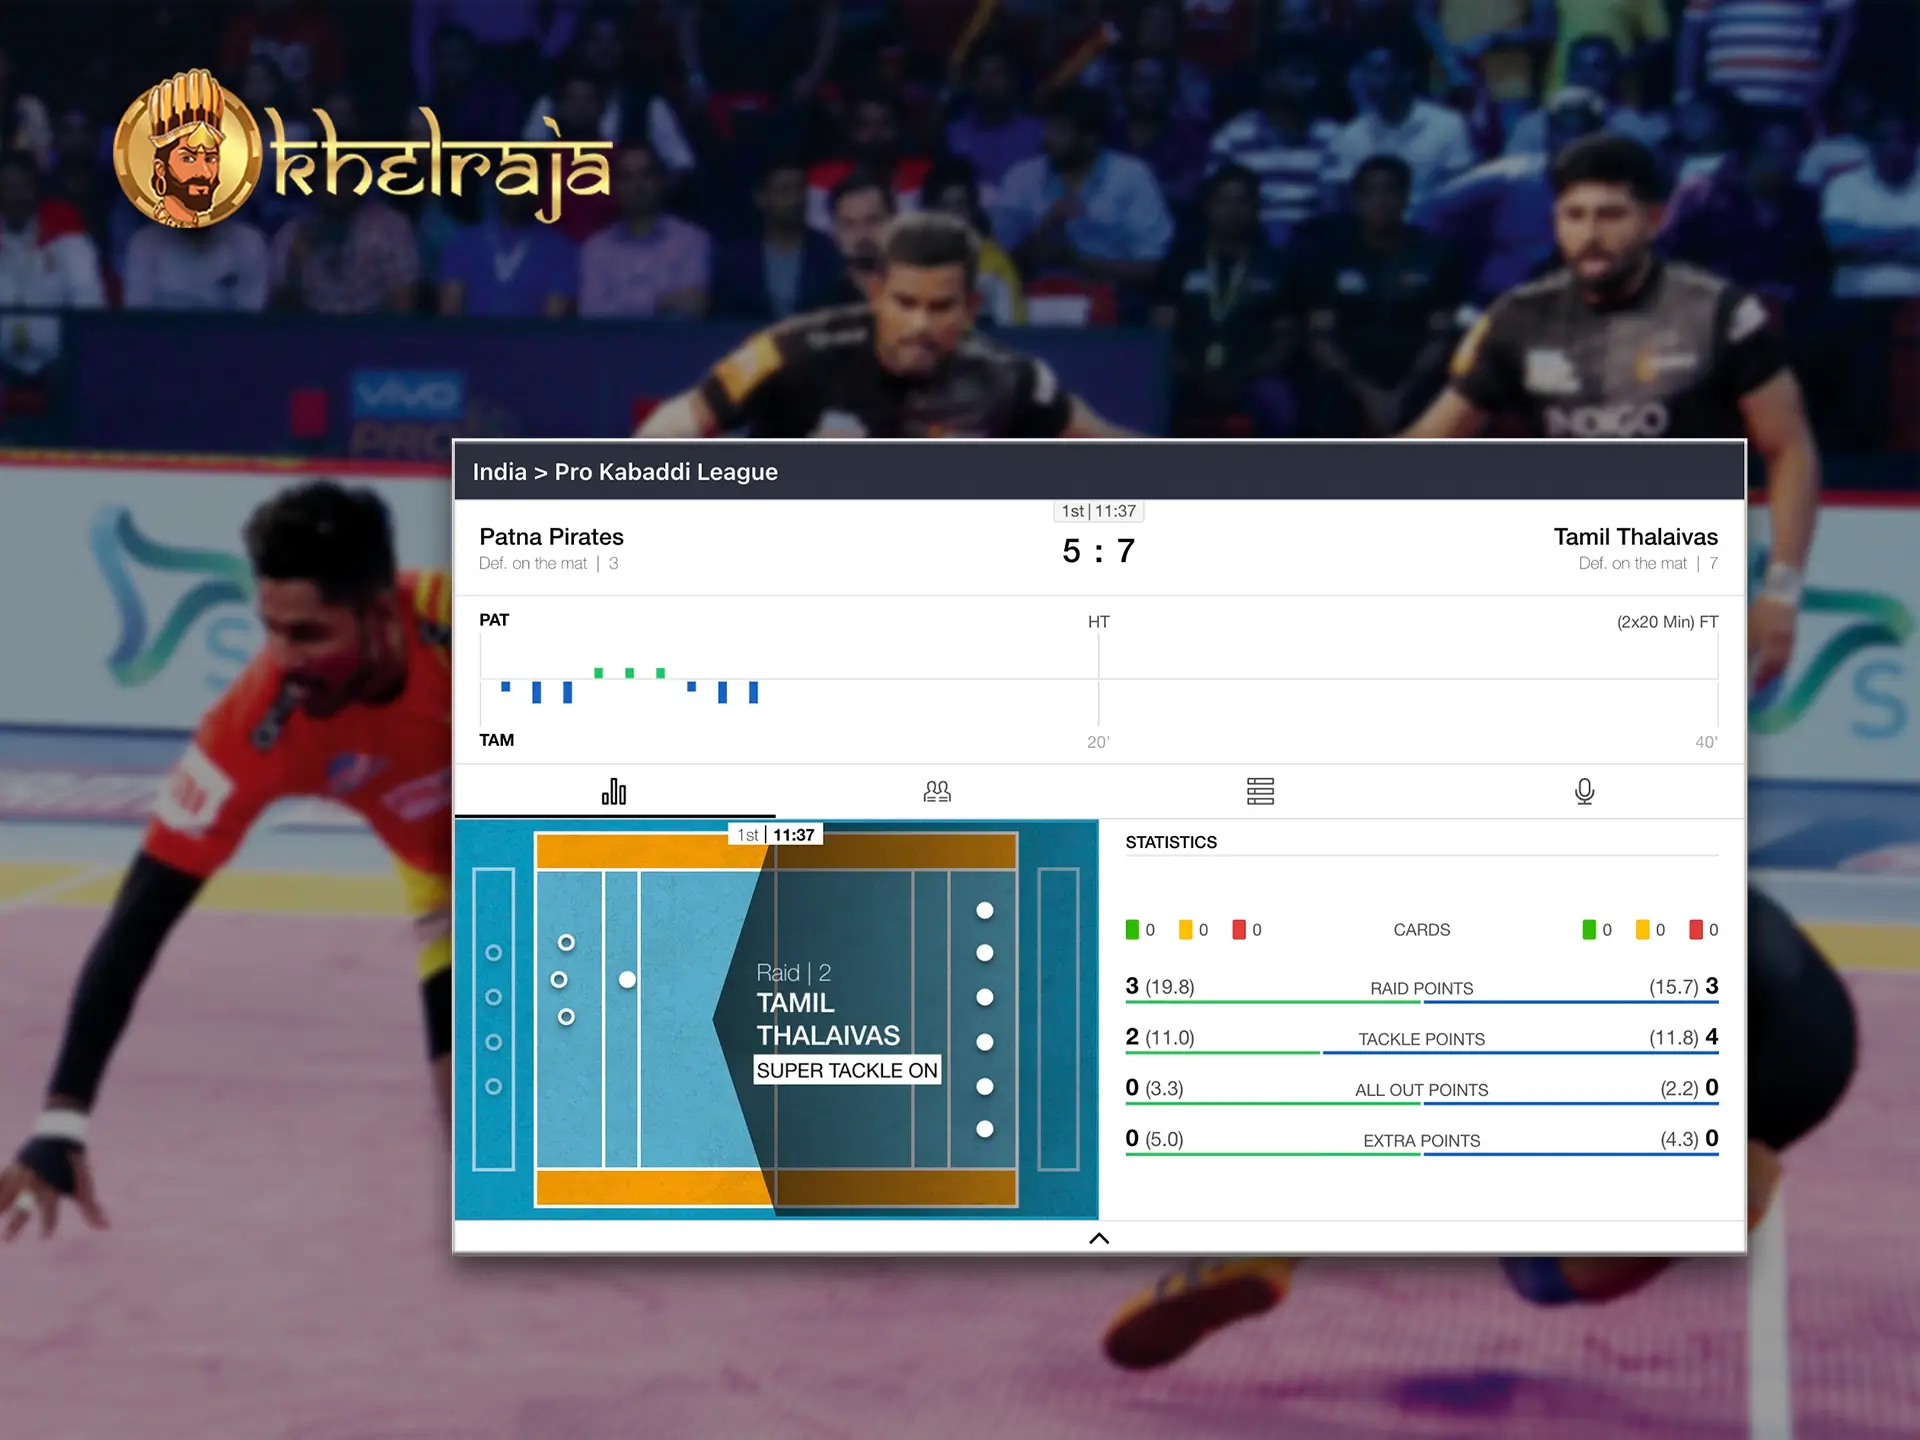 Khelraja's website allows you to follow Kabaddi on the pitch live.